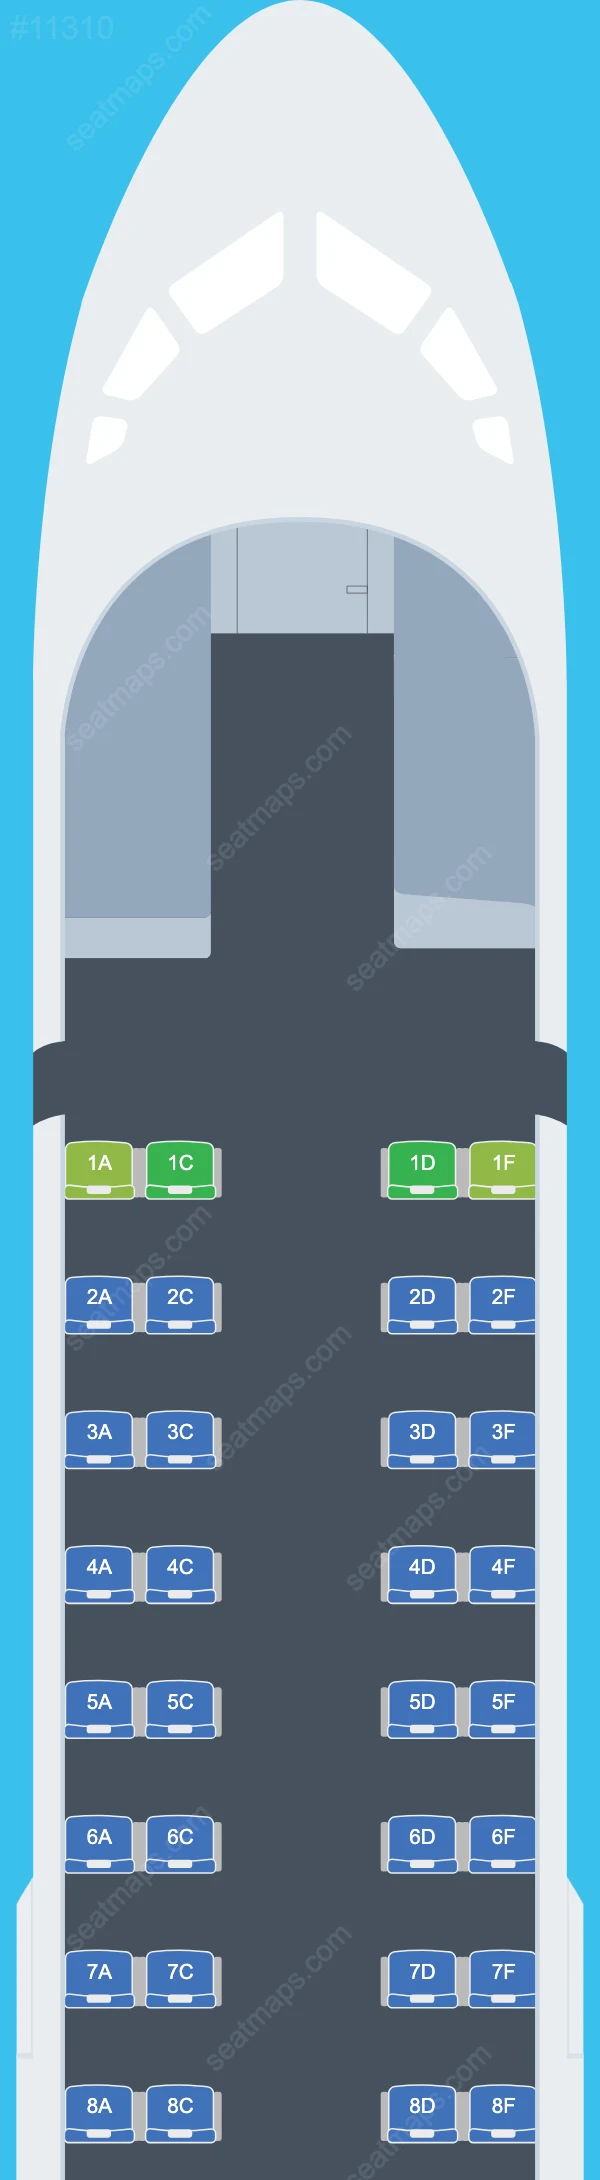 Emerald Airlines UK ATR 72-600 seatmap preview